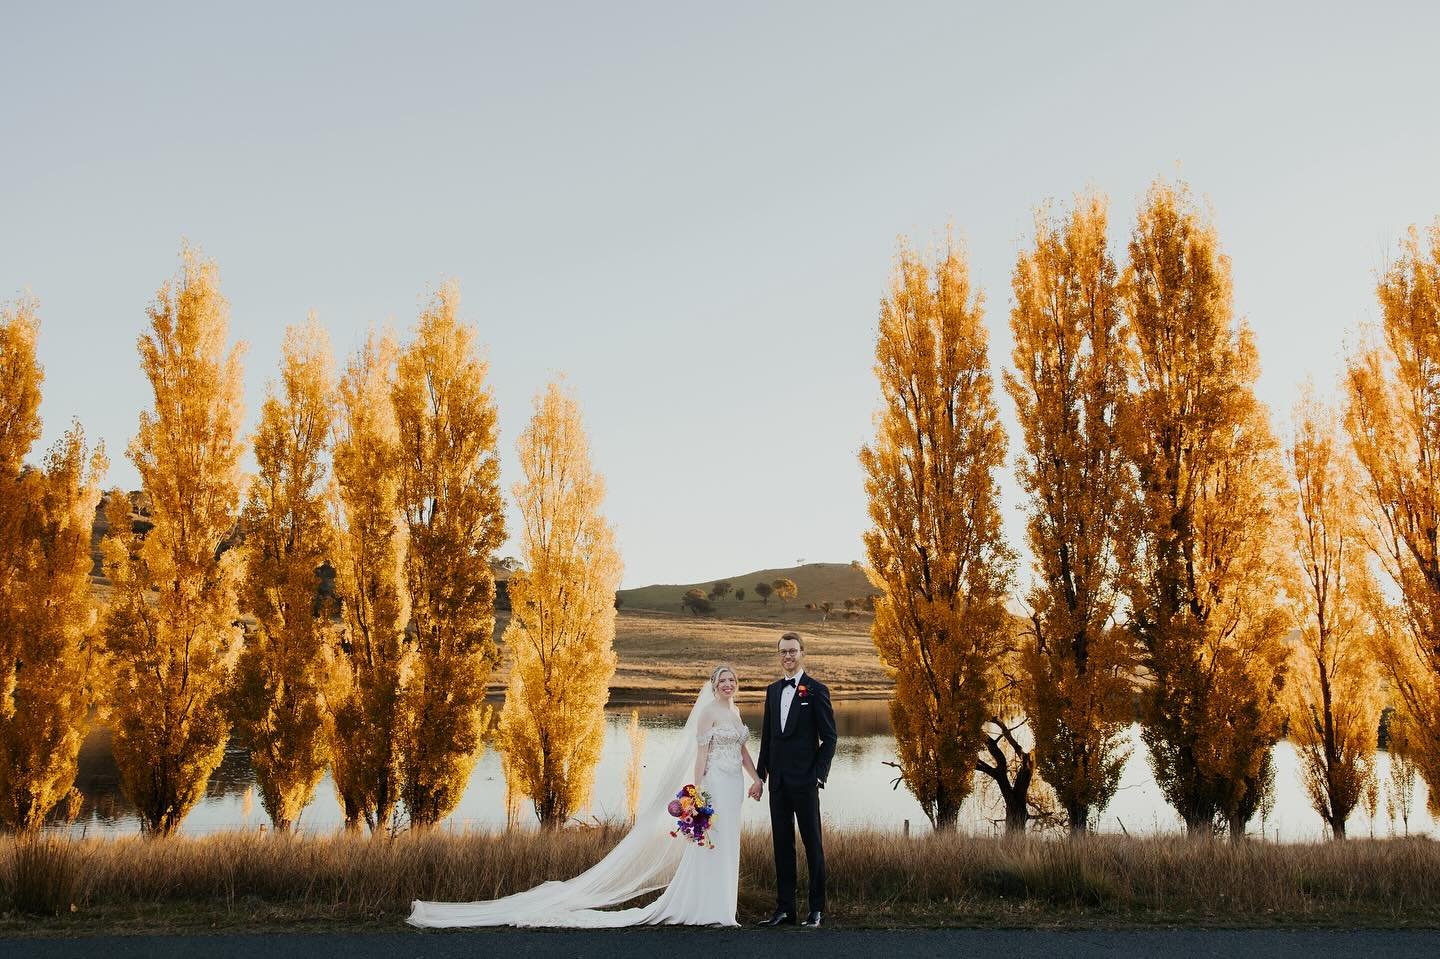 Autumn delivered an epic burst of colour for Jenny and David 🍁🍁🍁

#autumncolors #autumnwedding #poacherspantryweddings #canberraweddings #canberraweddingphotographer